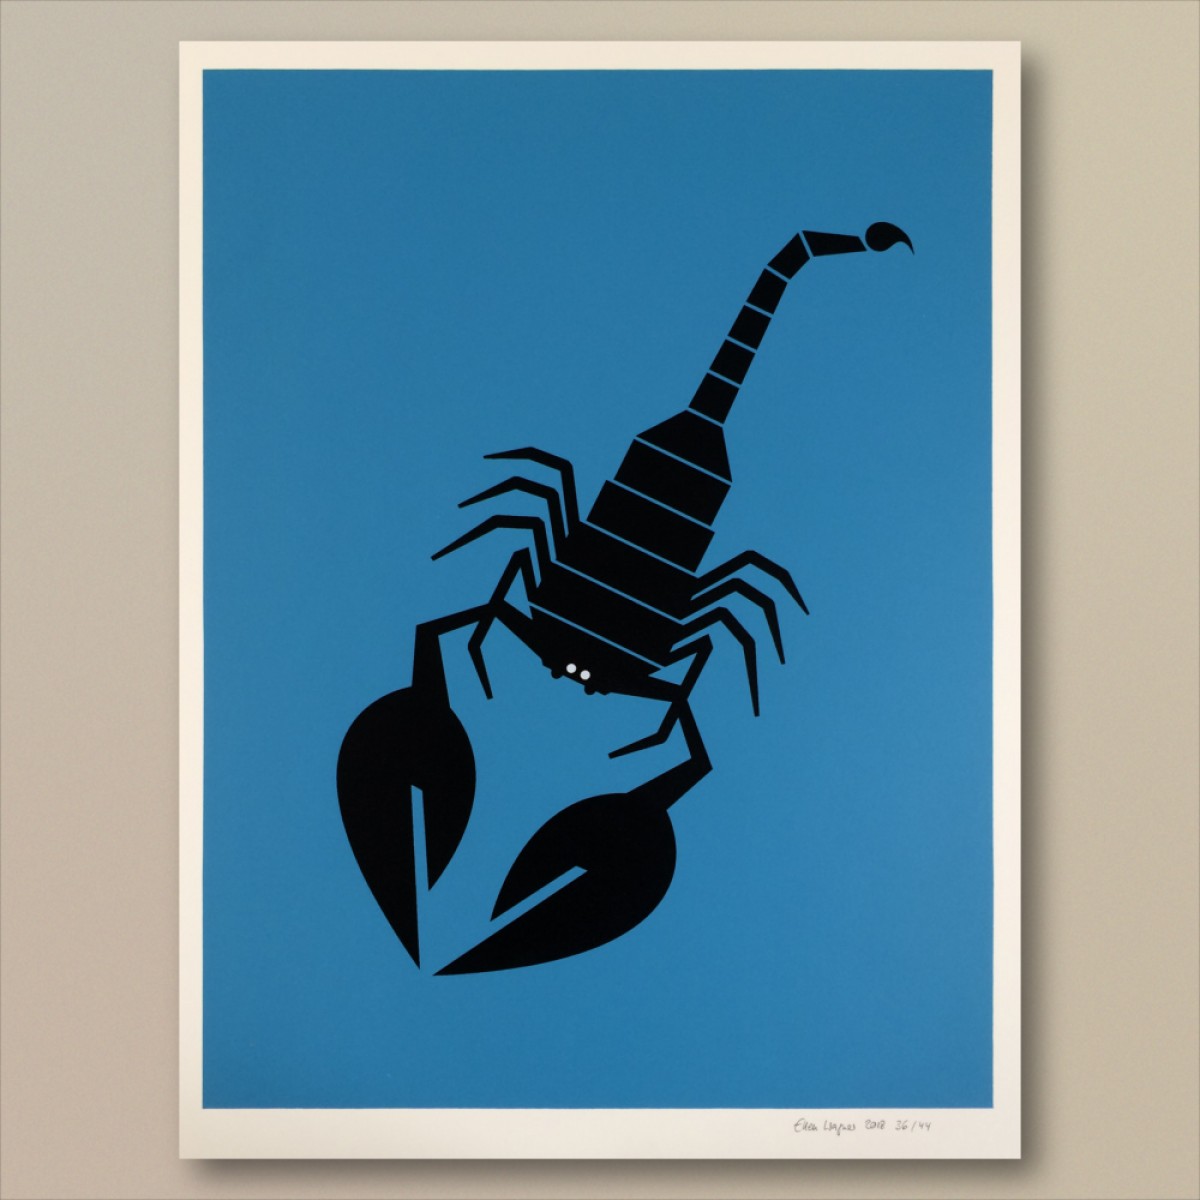 Print now - Riot later
Abstract Scorpion